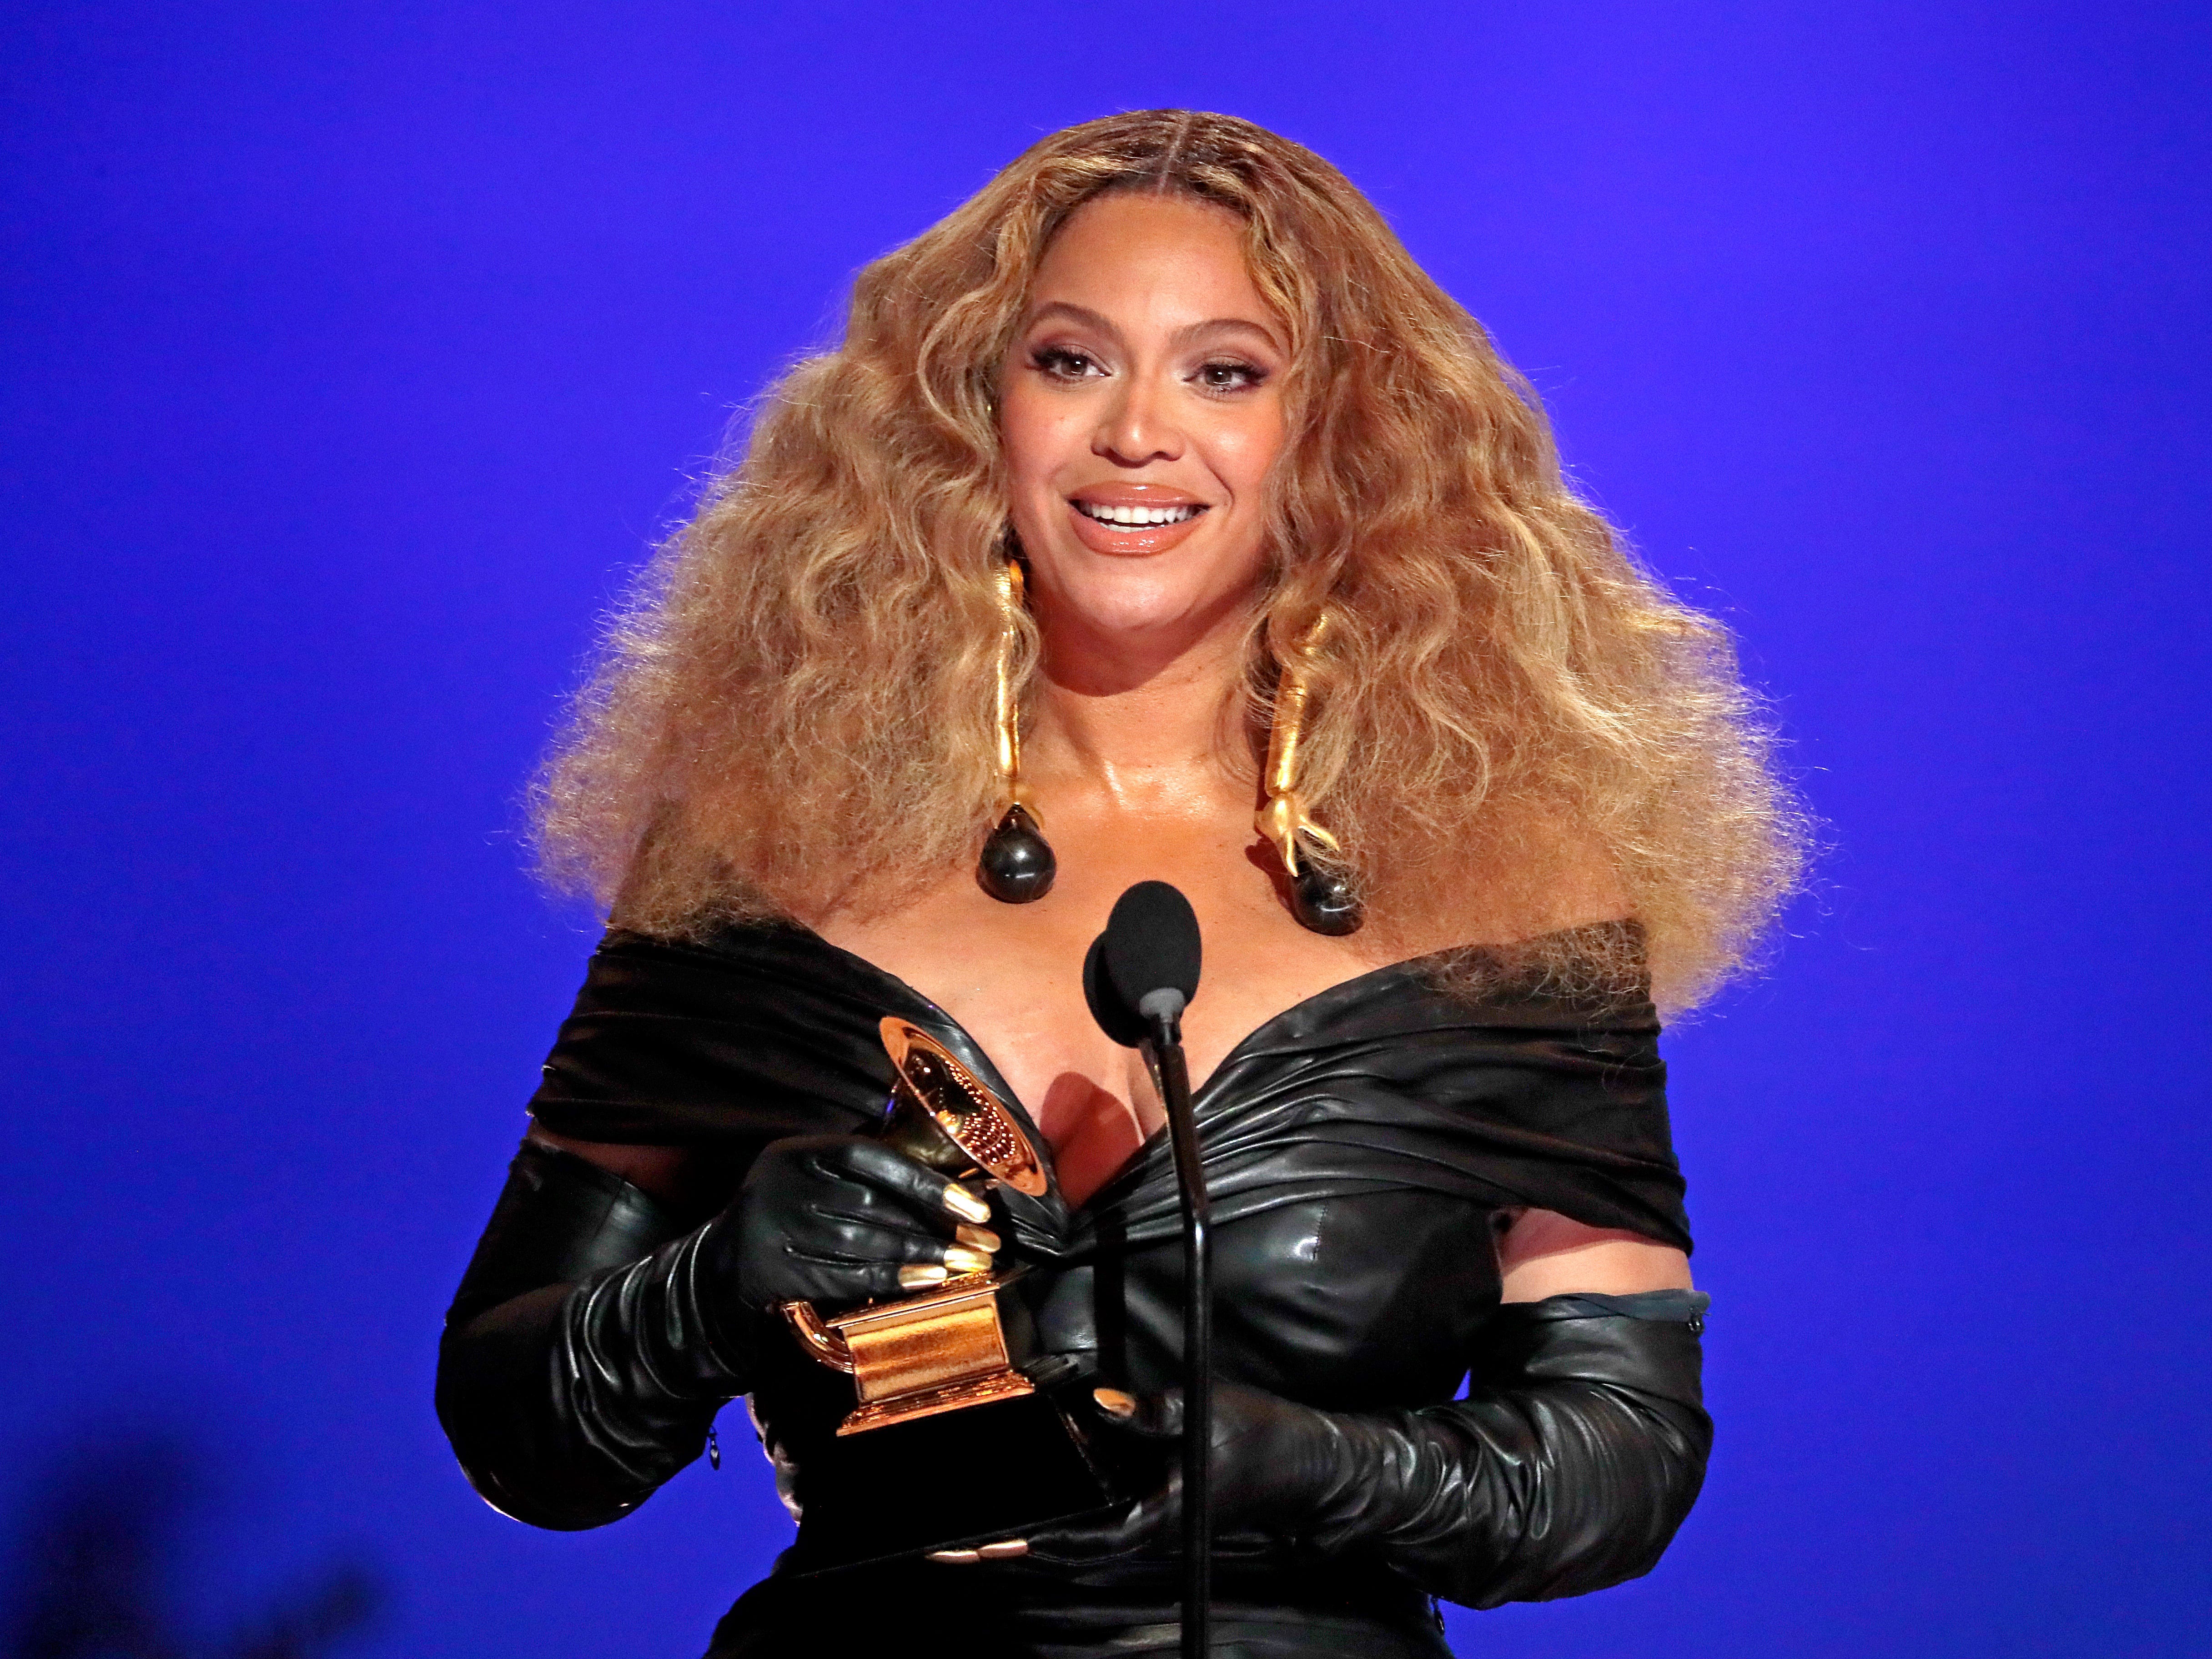 Beyonce accepts the Best R&B Performance award at the 63rd Grammys on March 14, 2021, in Los Angeles, California.